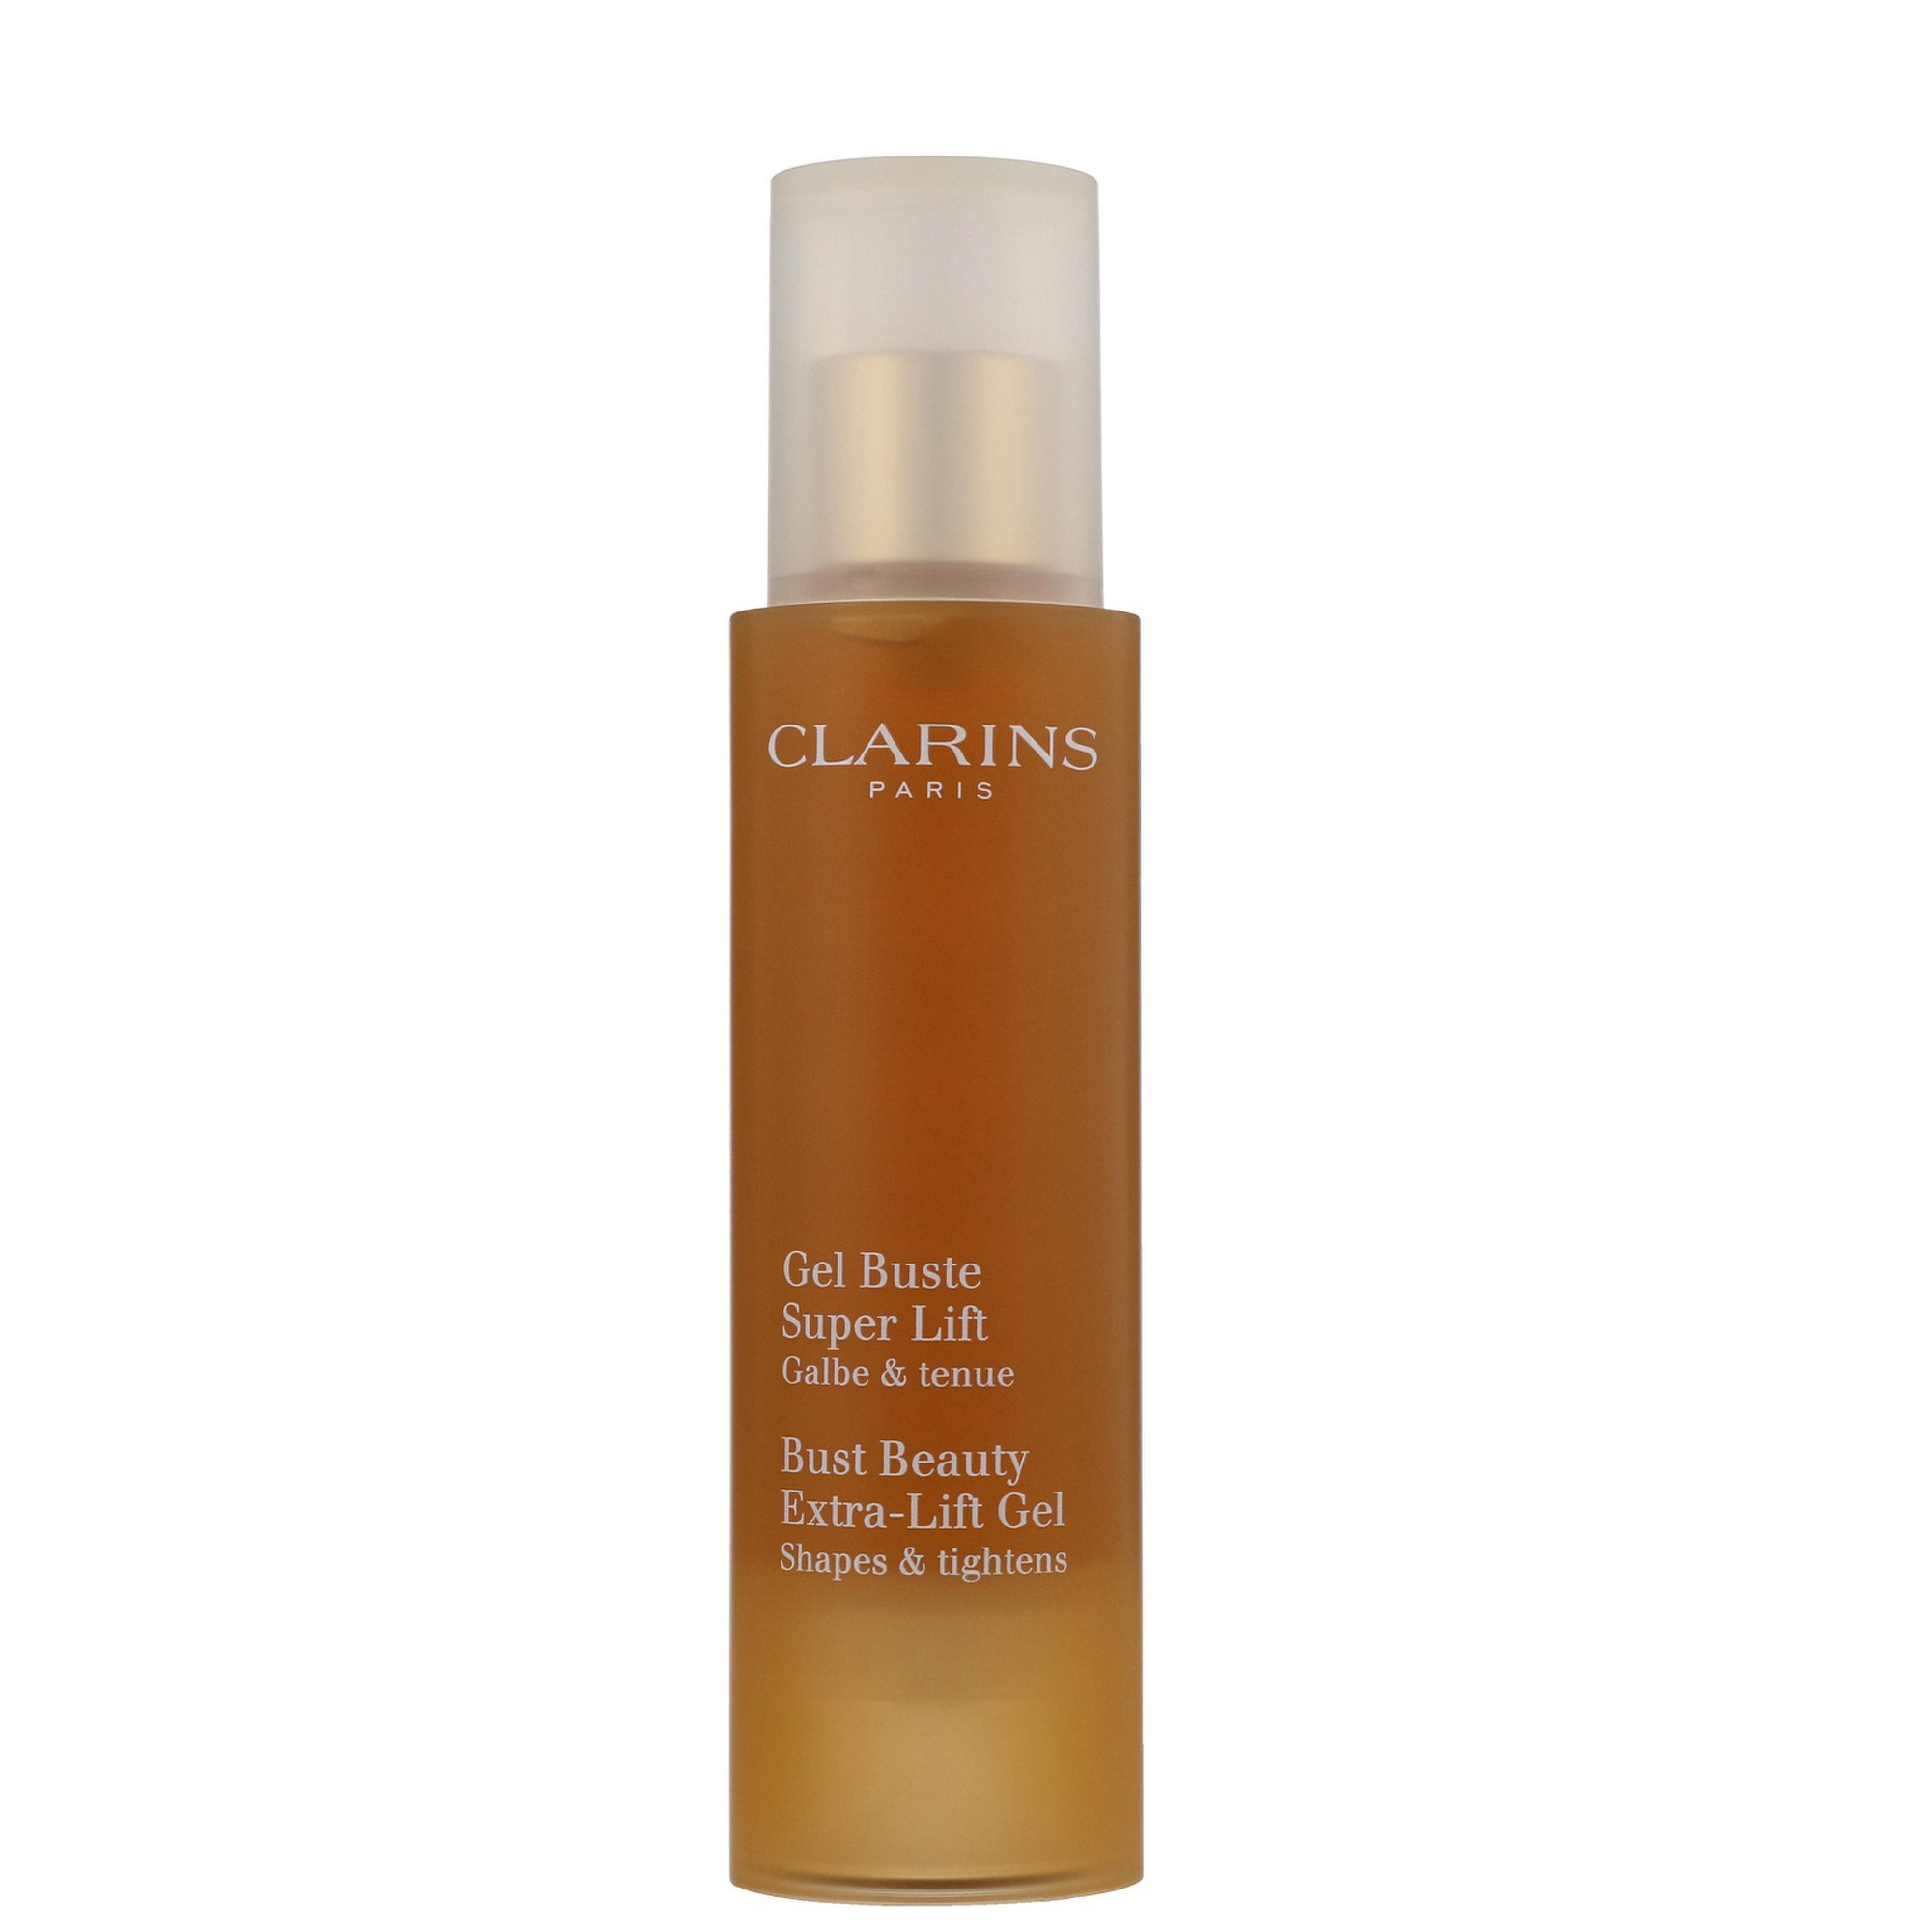 Image of Clarins Bust Care Bust Beauty Extra-Lift Gel 50ml / 1.7 oz.